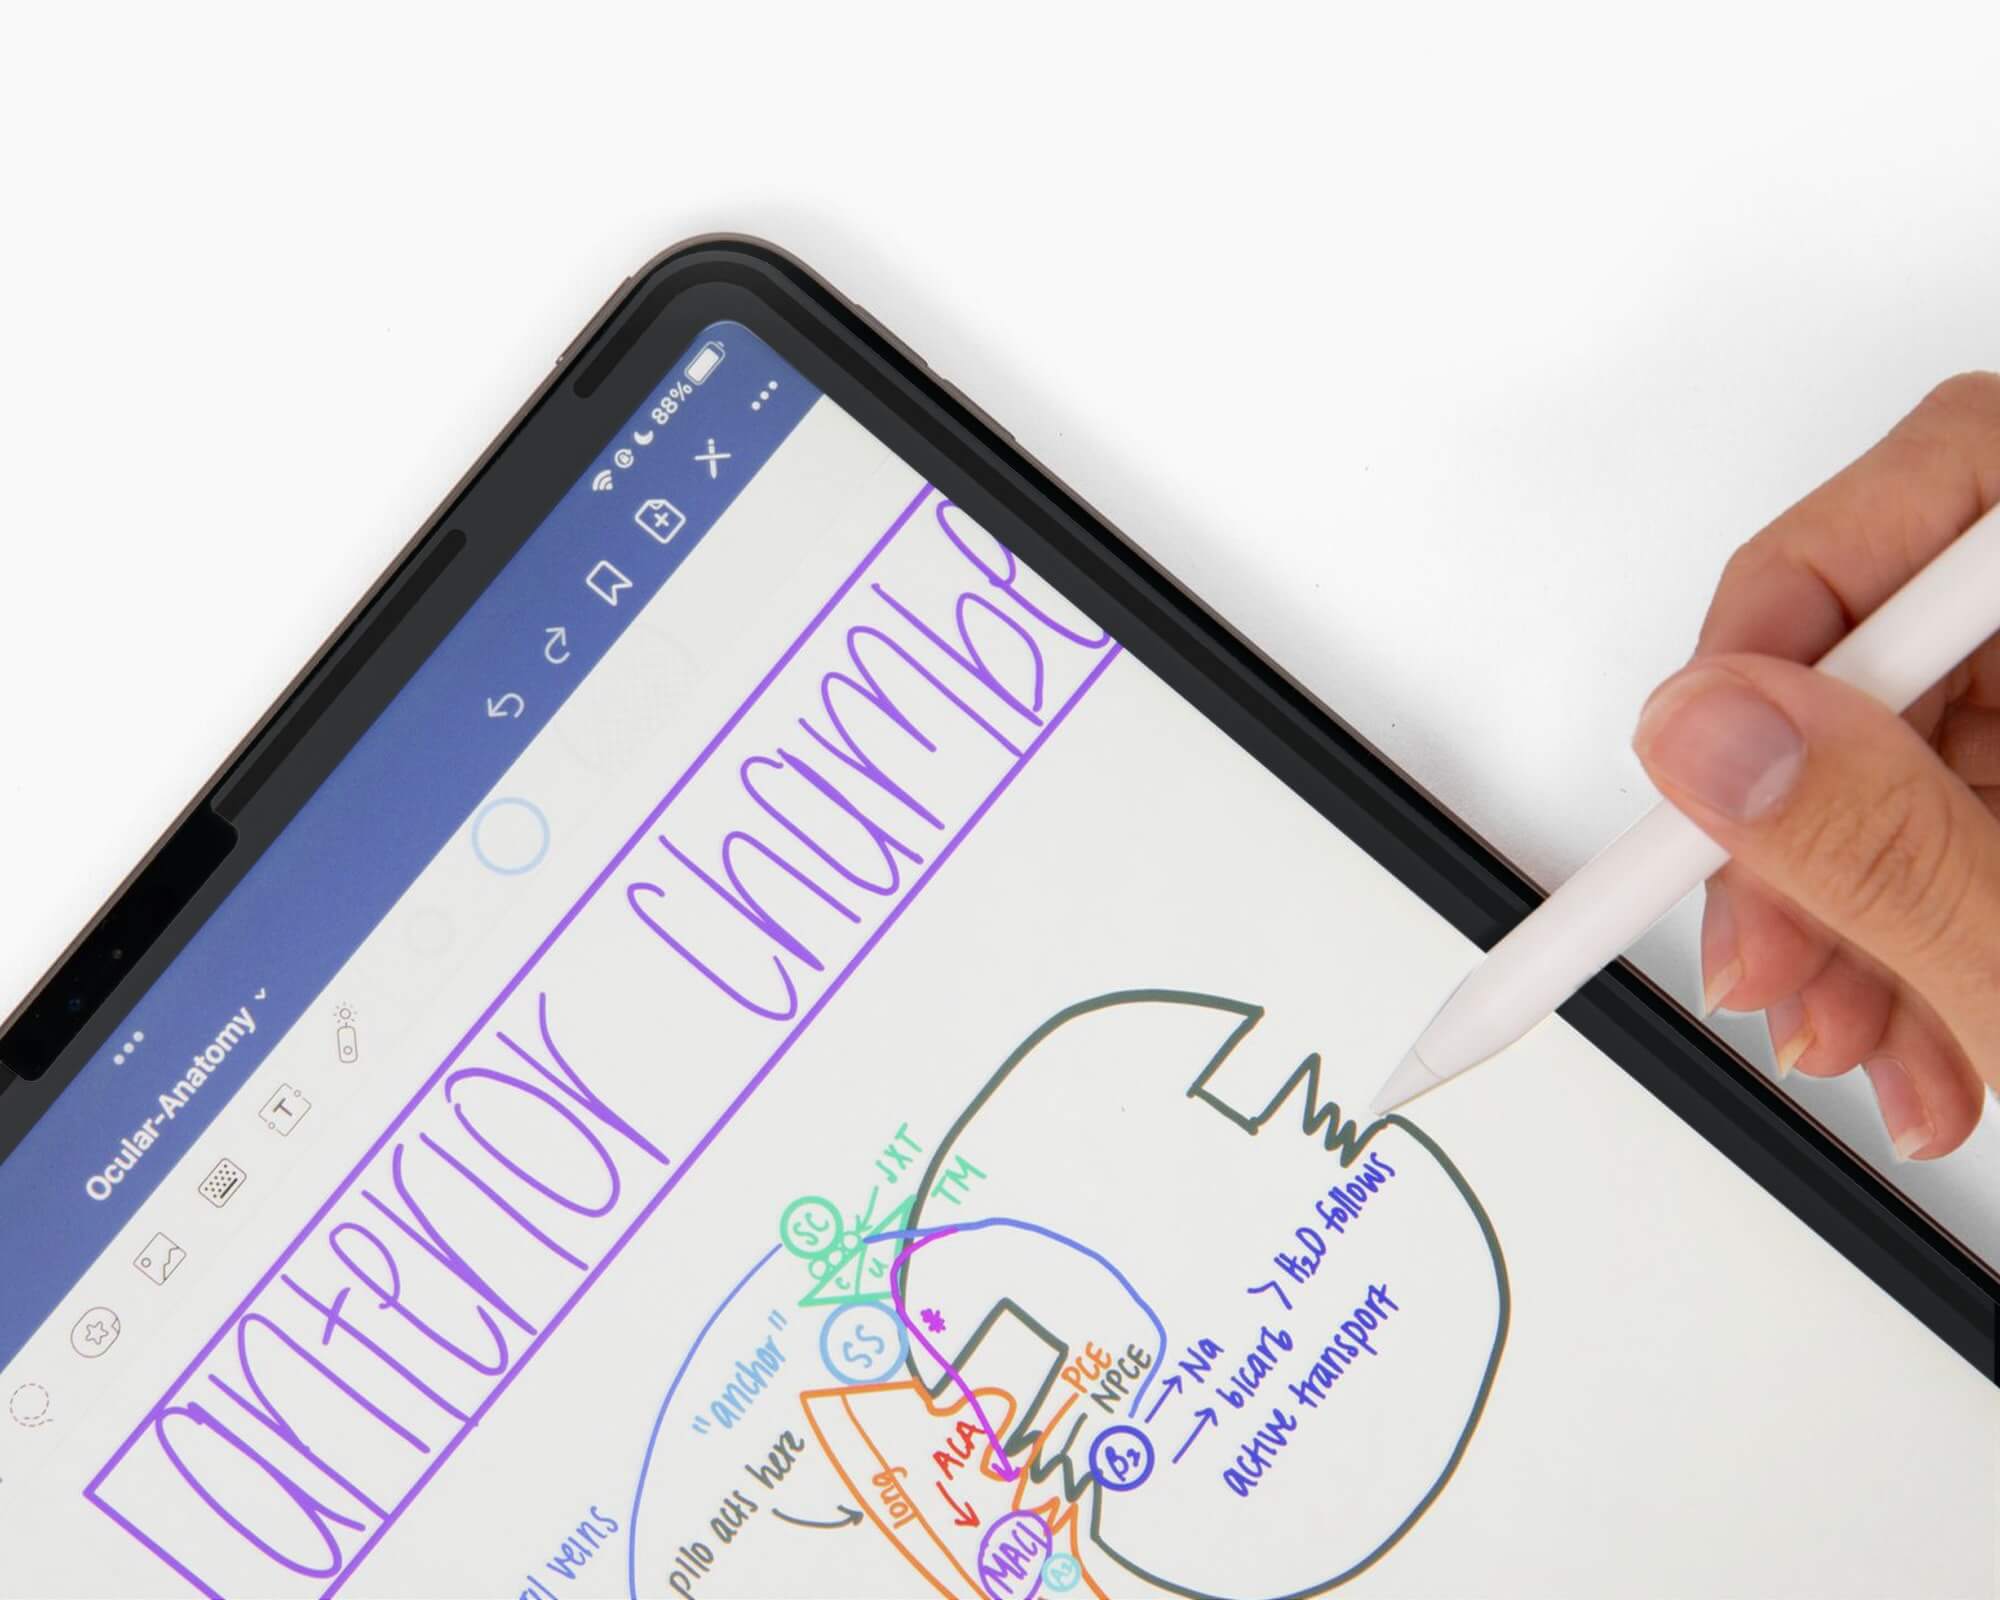 An iPad with handwritten notes